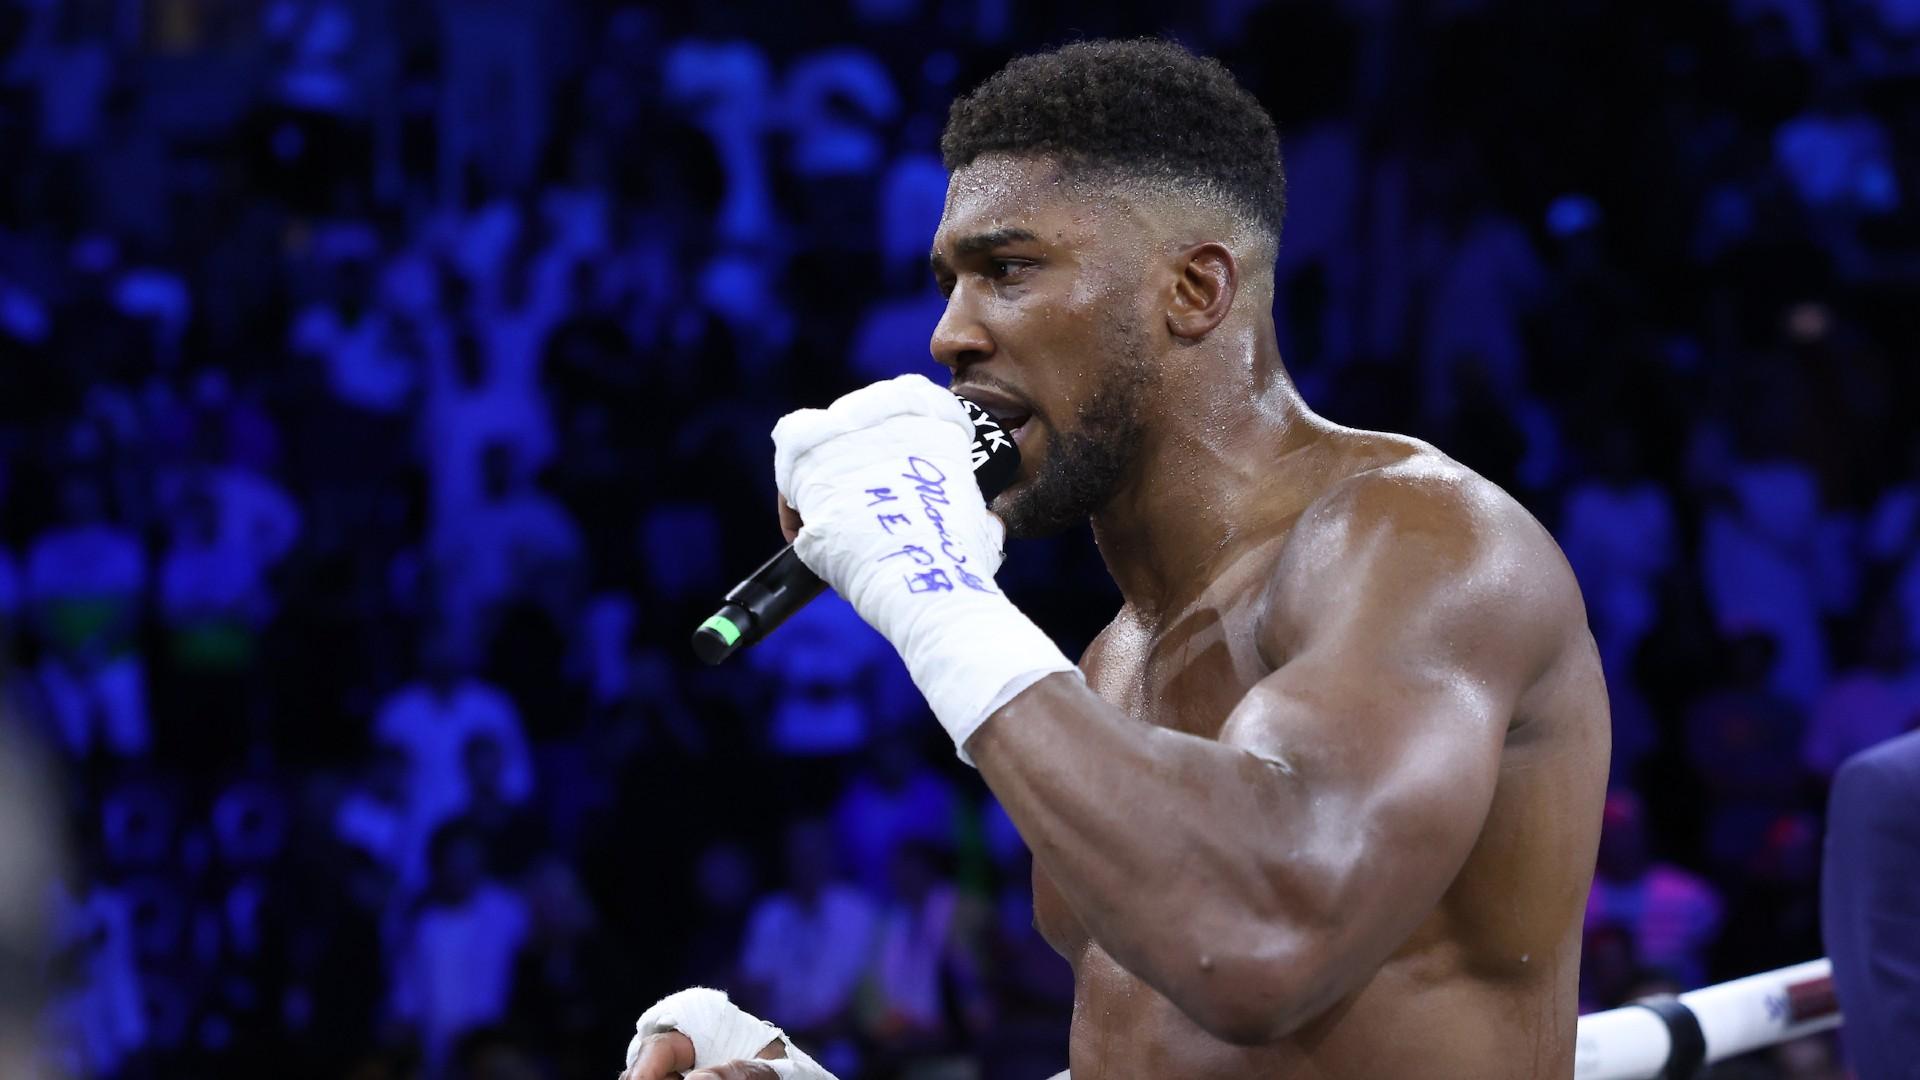 Boxer Anthony Joshua hits out at the boxing legends who 'lost respect' for him when he lost his heavyweight world titles